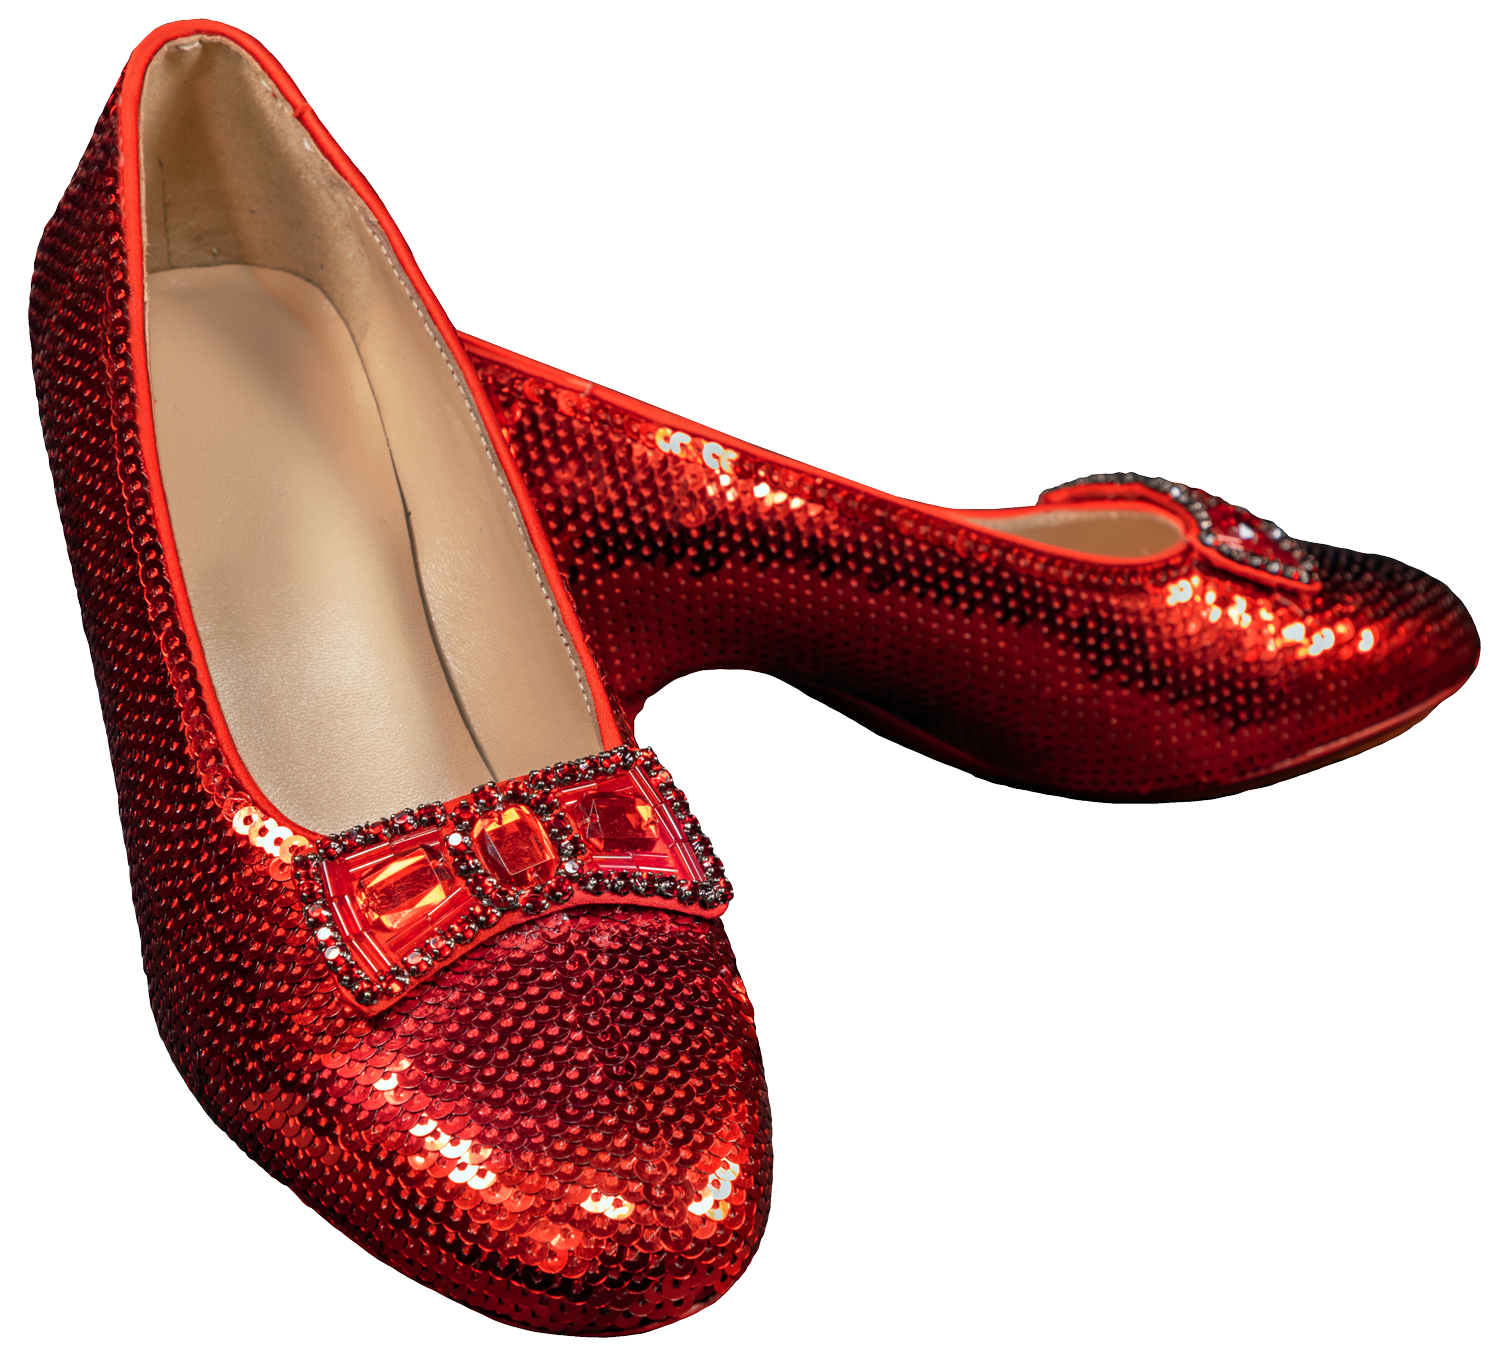 IKO1703--Wizard-of-Oz-Ruby-Slippers-in-case-V2-SHOES-1.png